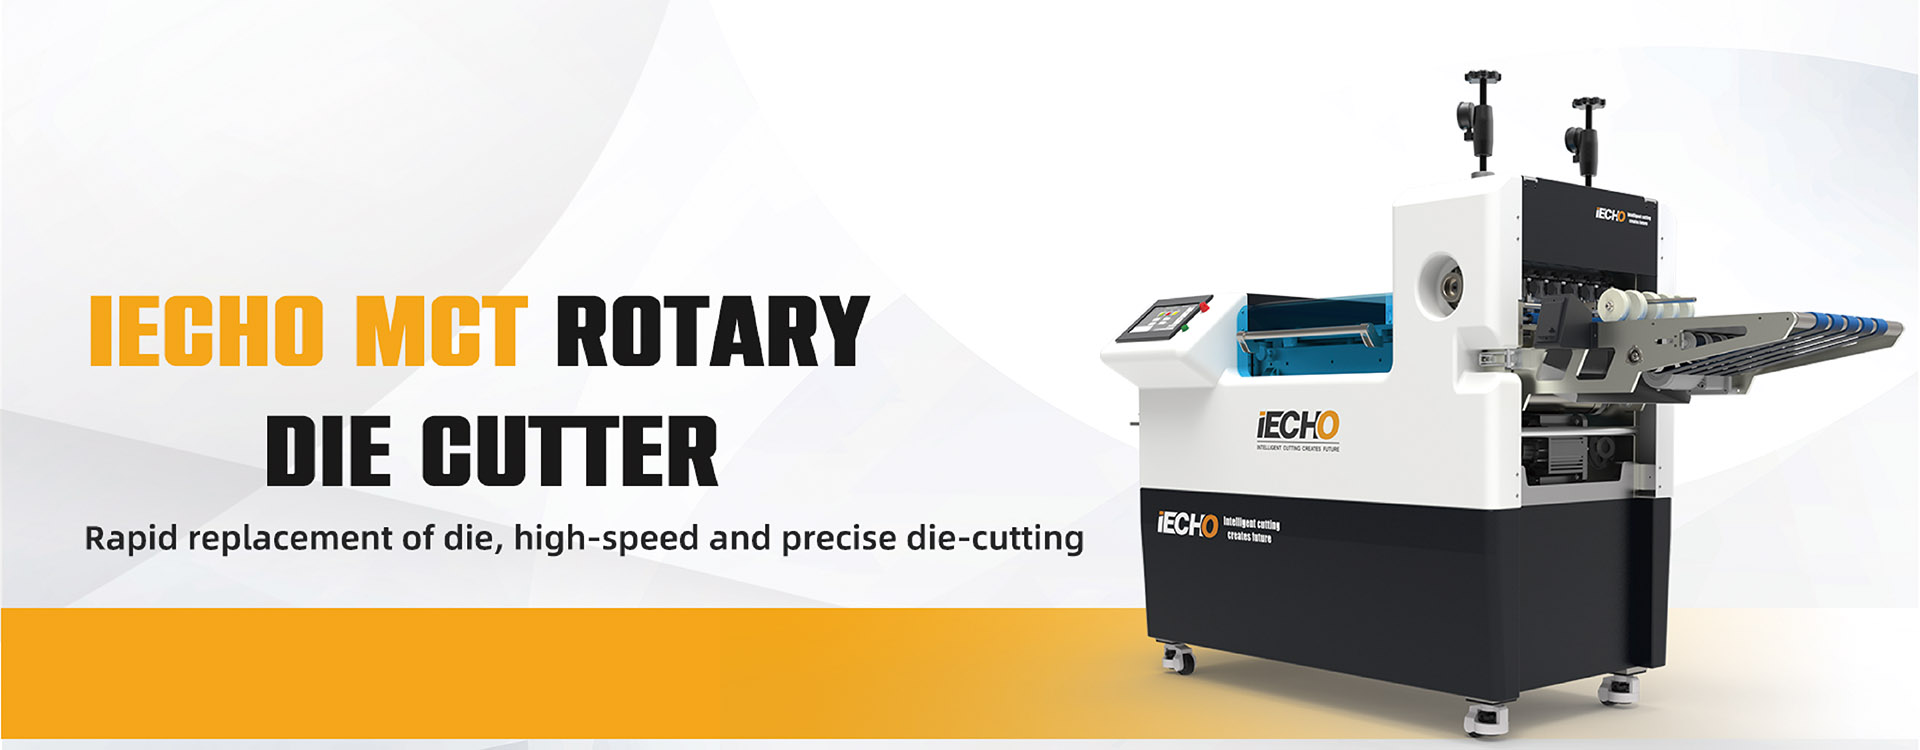 MCT Rotary die cutter